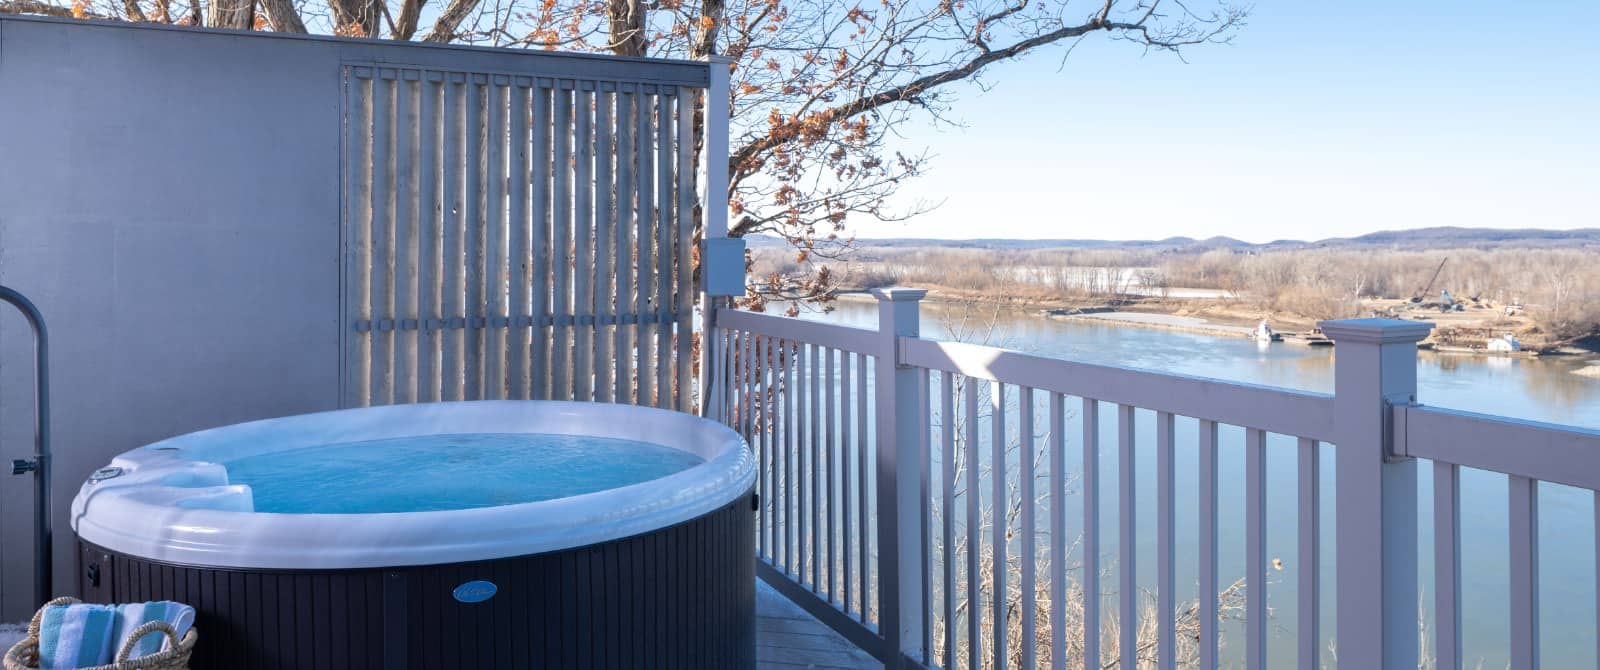 Deck with small jetted tub and view of river in the background